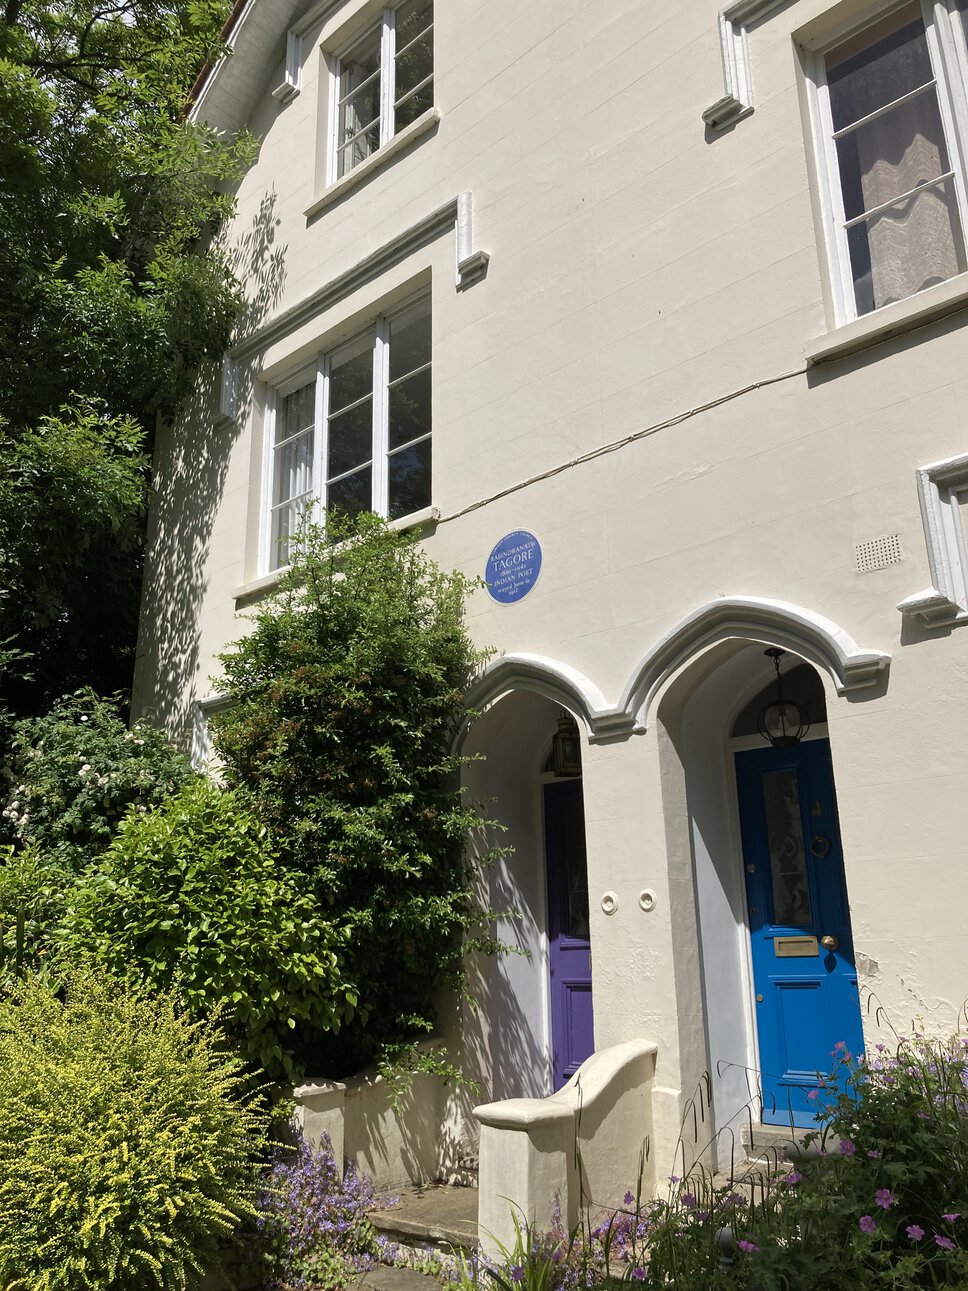 Façade of Rabindranath Tagore residence (1912), showing front door, first story, and second story plus blue plaque.